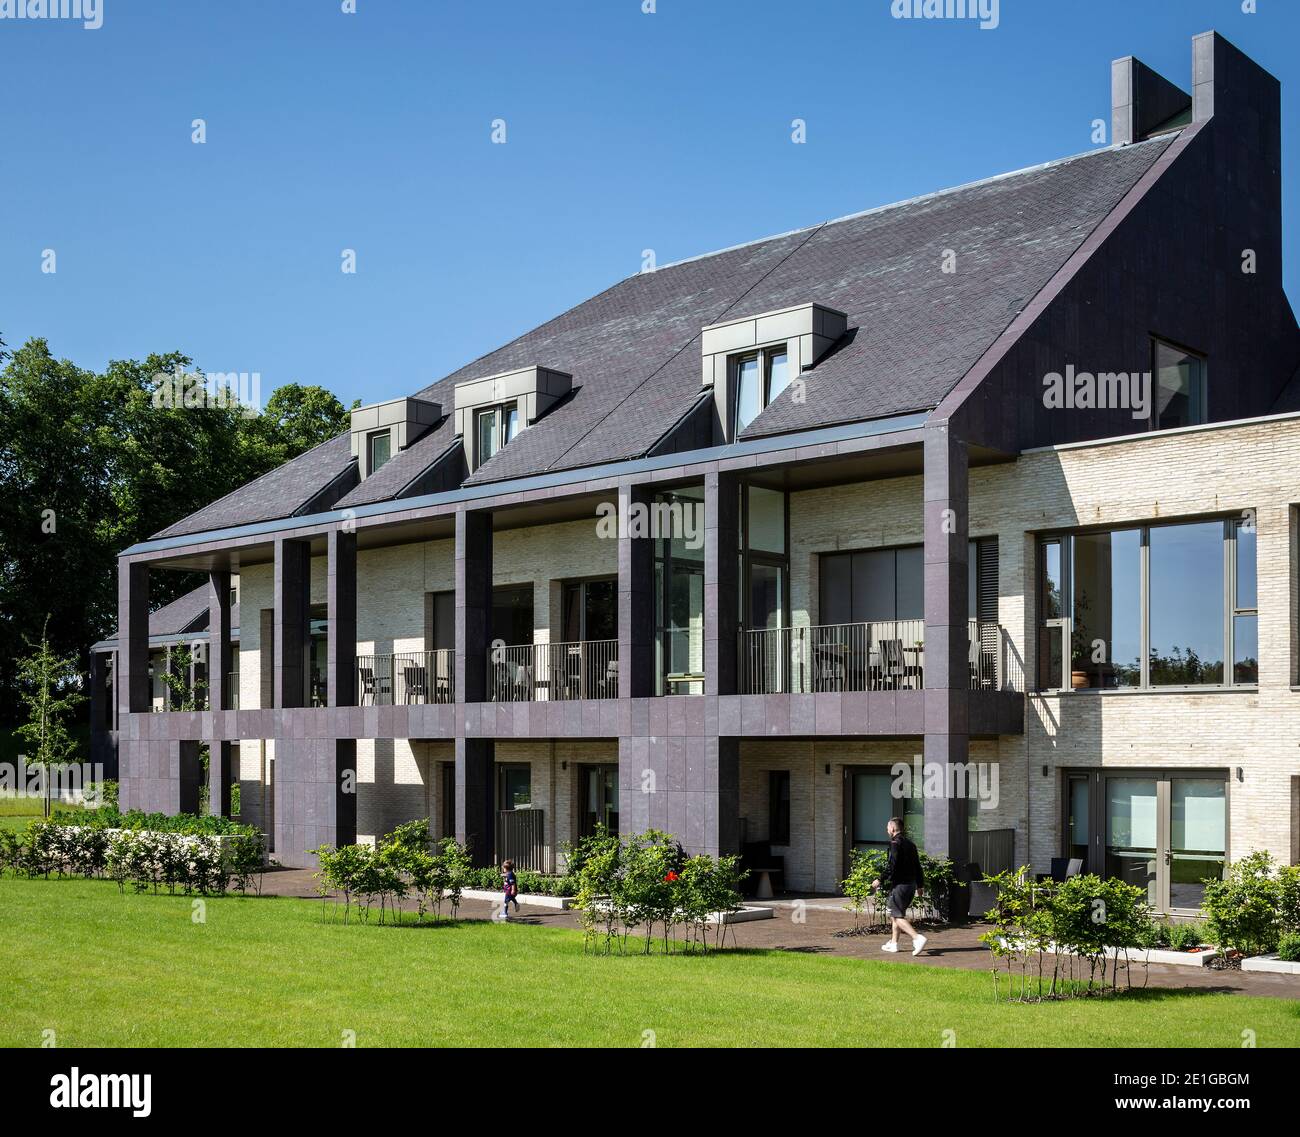 Prince and Princess of Wales Hospice, Bellahouston Park, Glasgow, Scotland, UK.  A  East elevation with balconies. Stock Photo